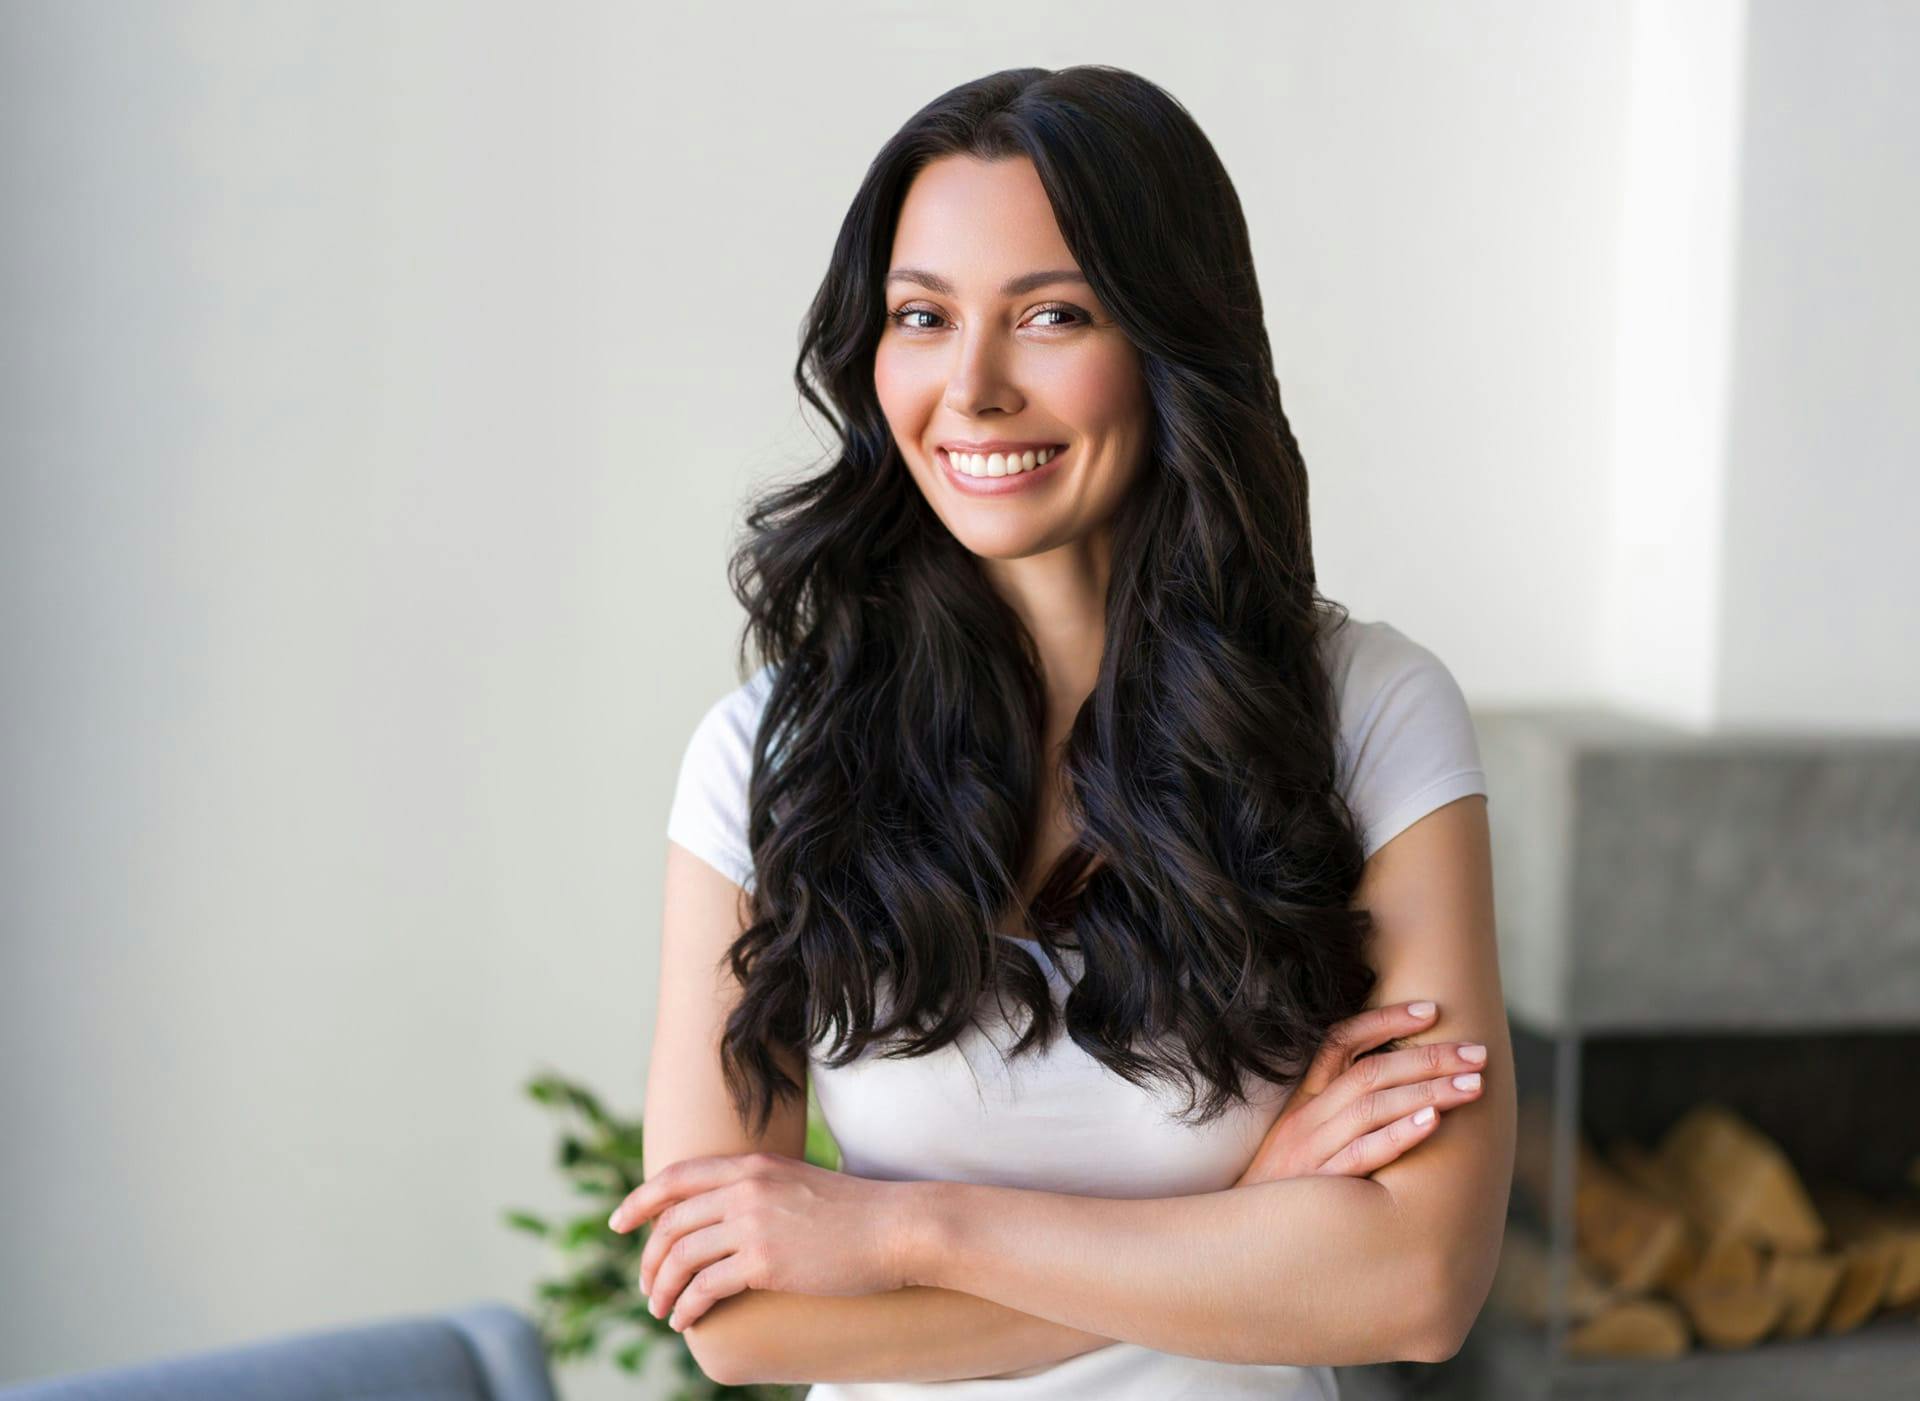 woman with long dark hair smiling